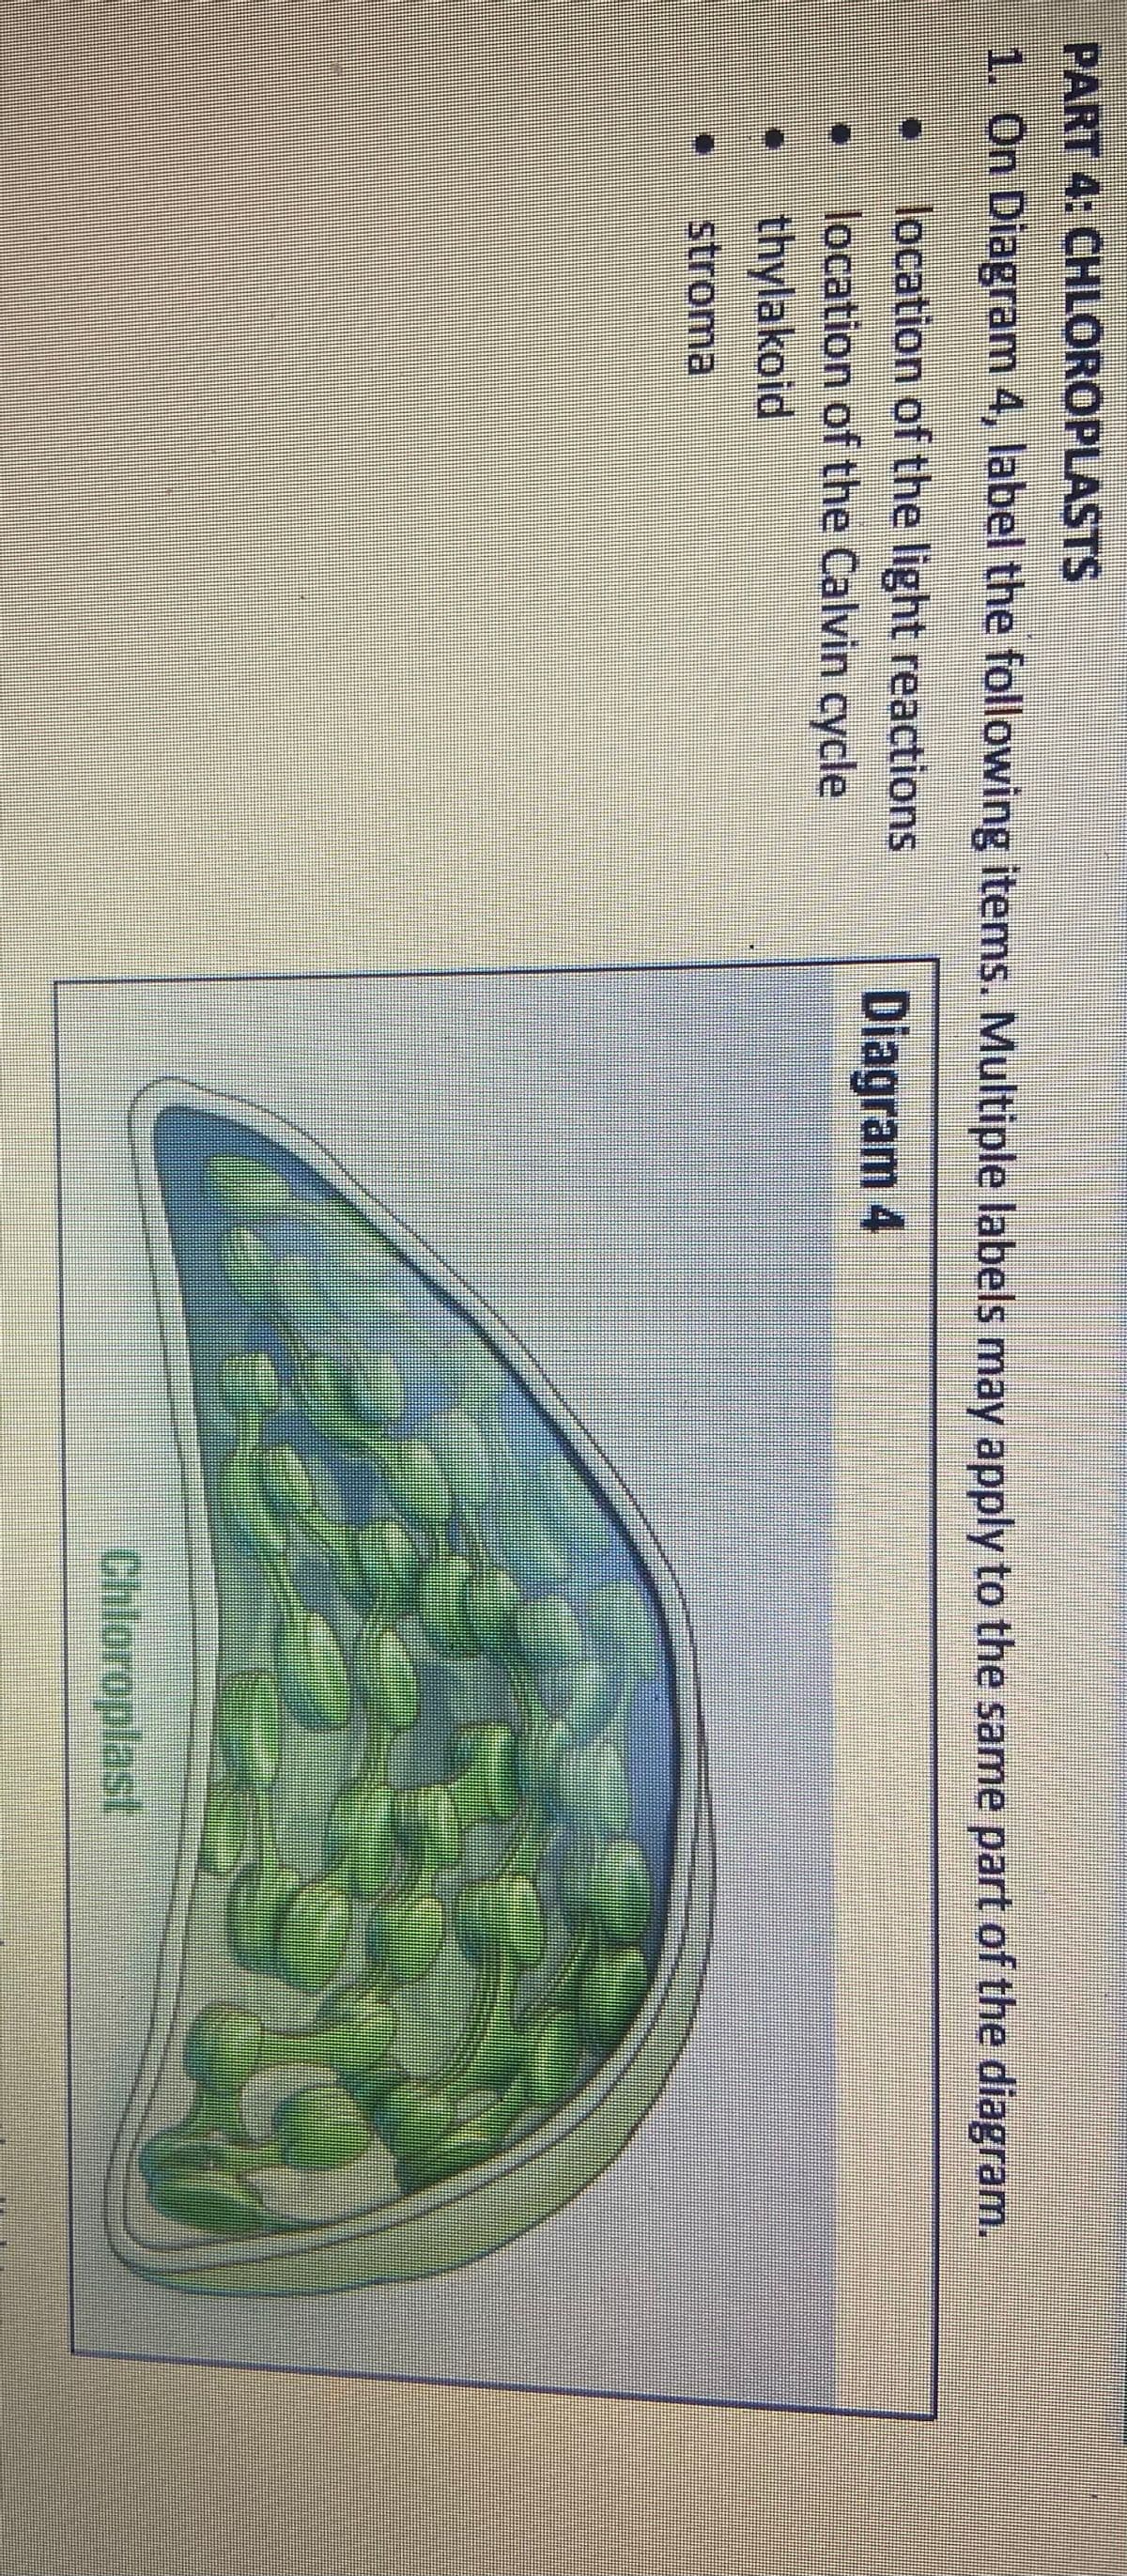 PART 4: CHLOROPLASTS
1. On Diagram 4, label the following items. Multiple labels may apply to the same part of the diagram.
Diagram 4
location of the light reactions
location of the Calvin cycle
thylakoid
stroma
187
Chloroplast